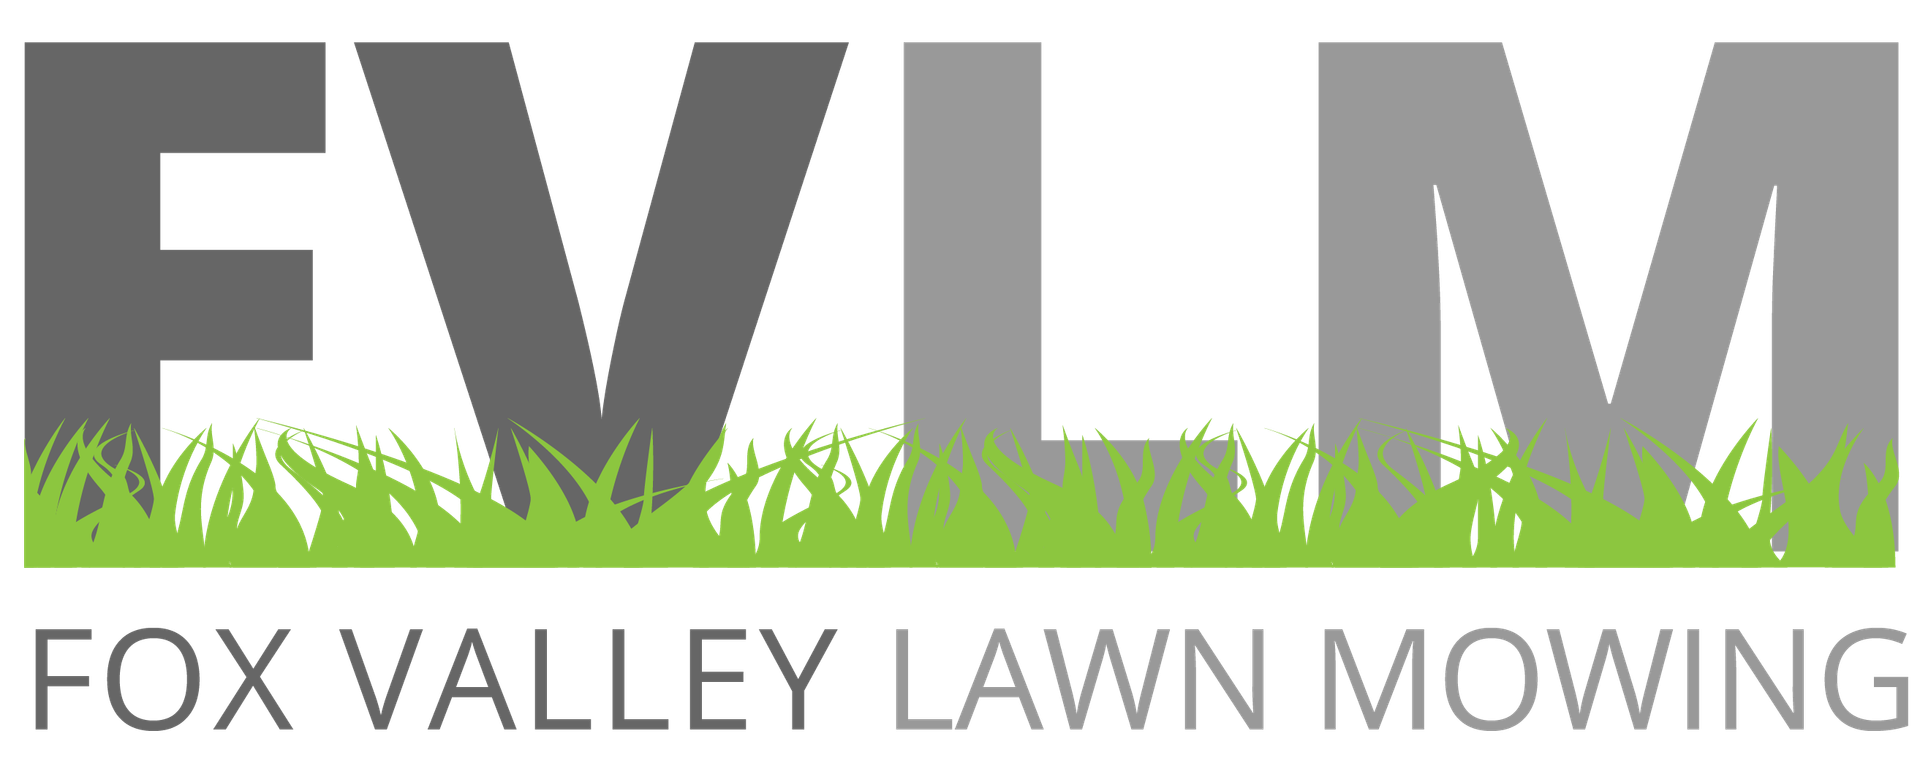 Fox Valley Lawn Mowing